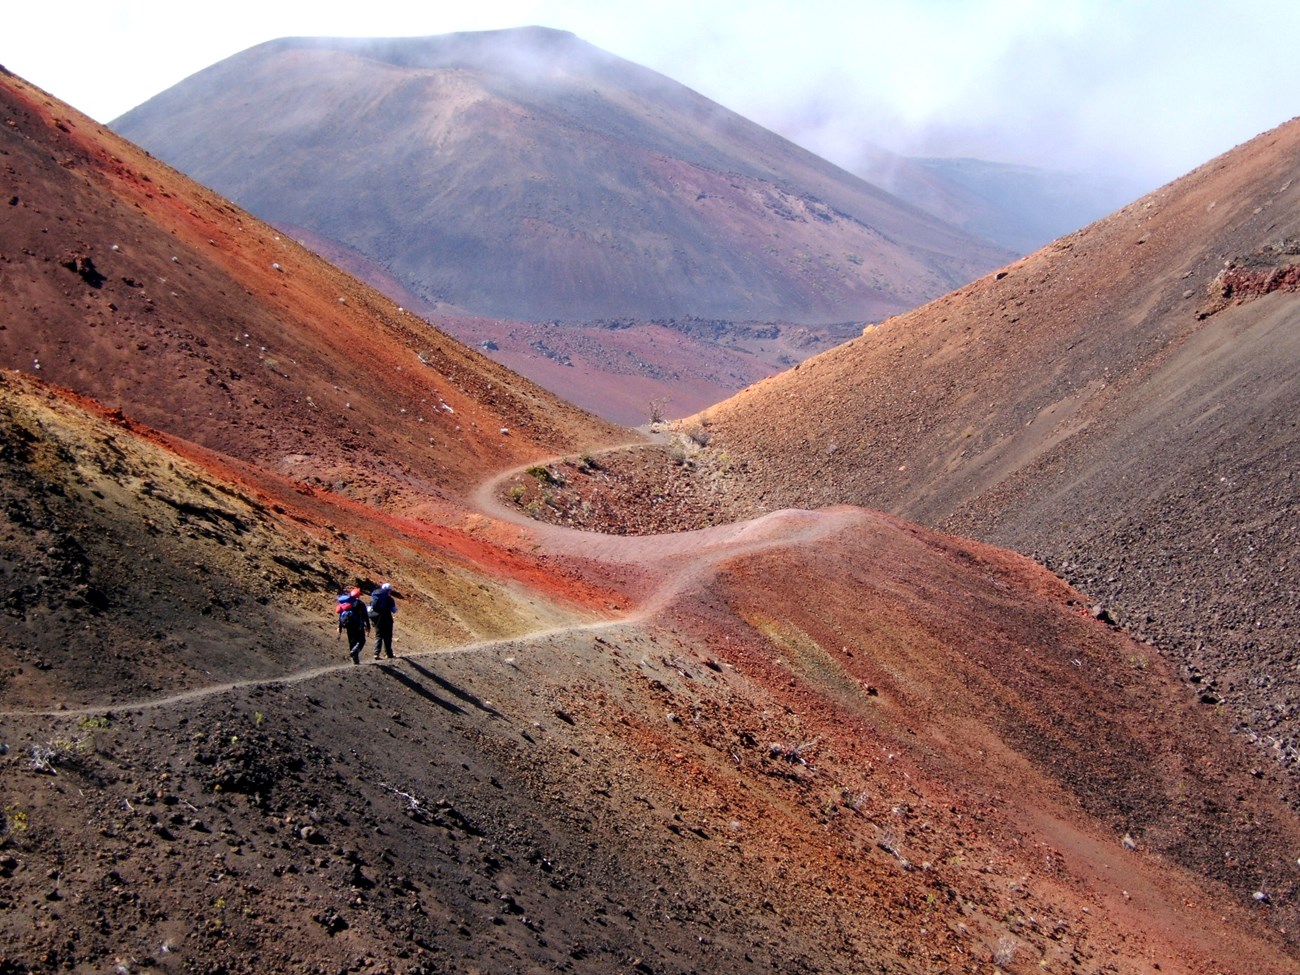 photo of hikers on a trail walking down a steep sided canyon of volcanic rocks and cinders